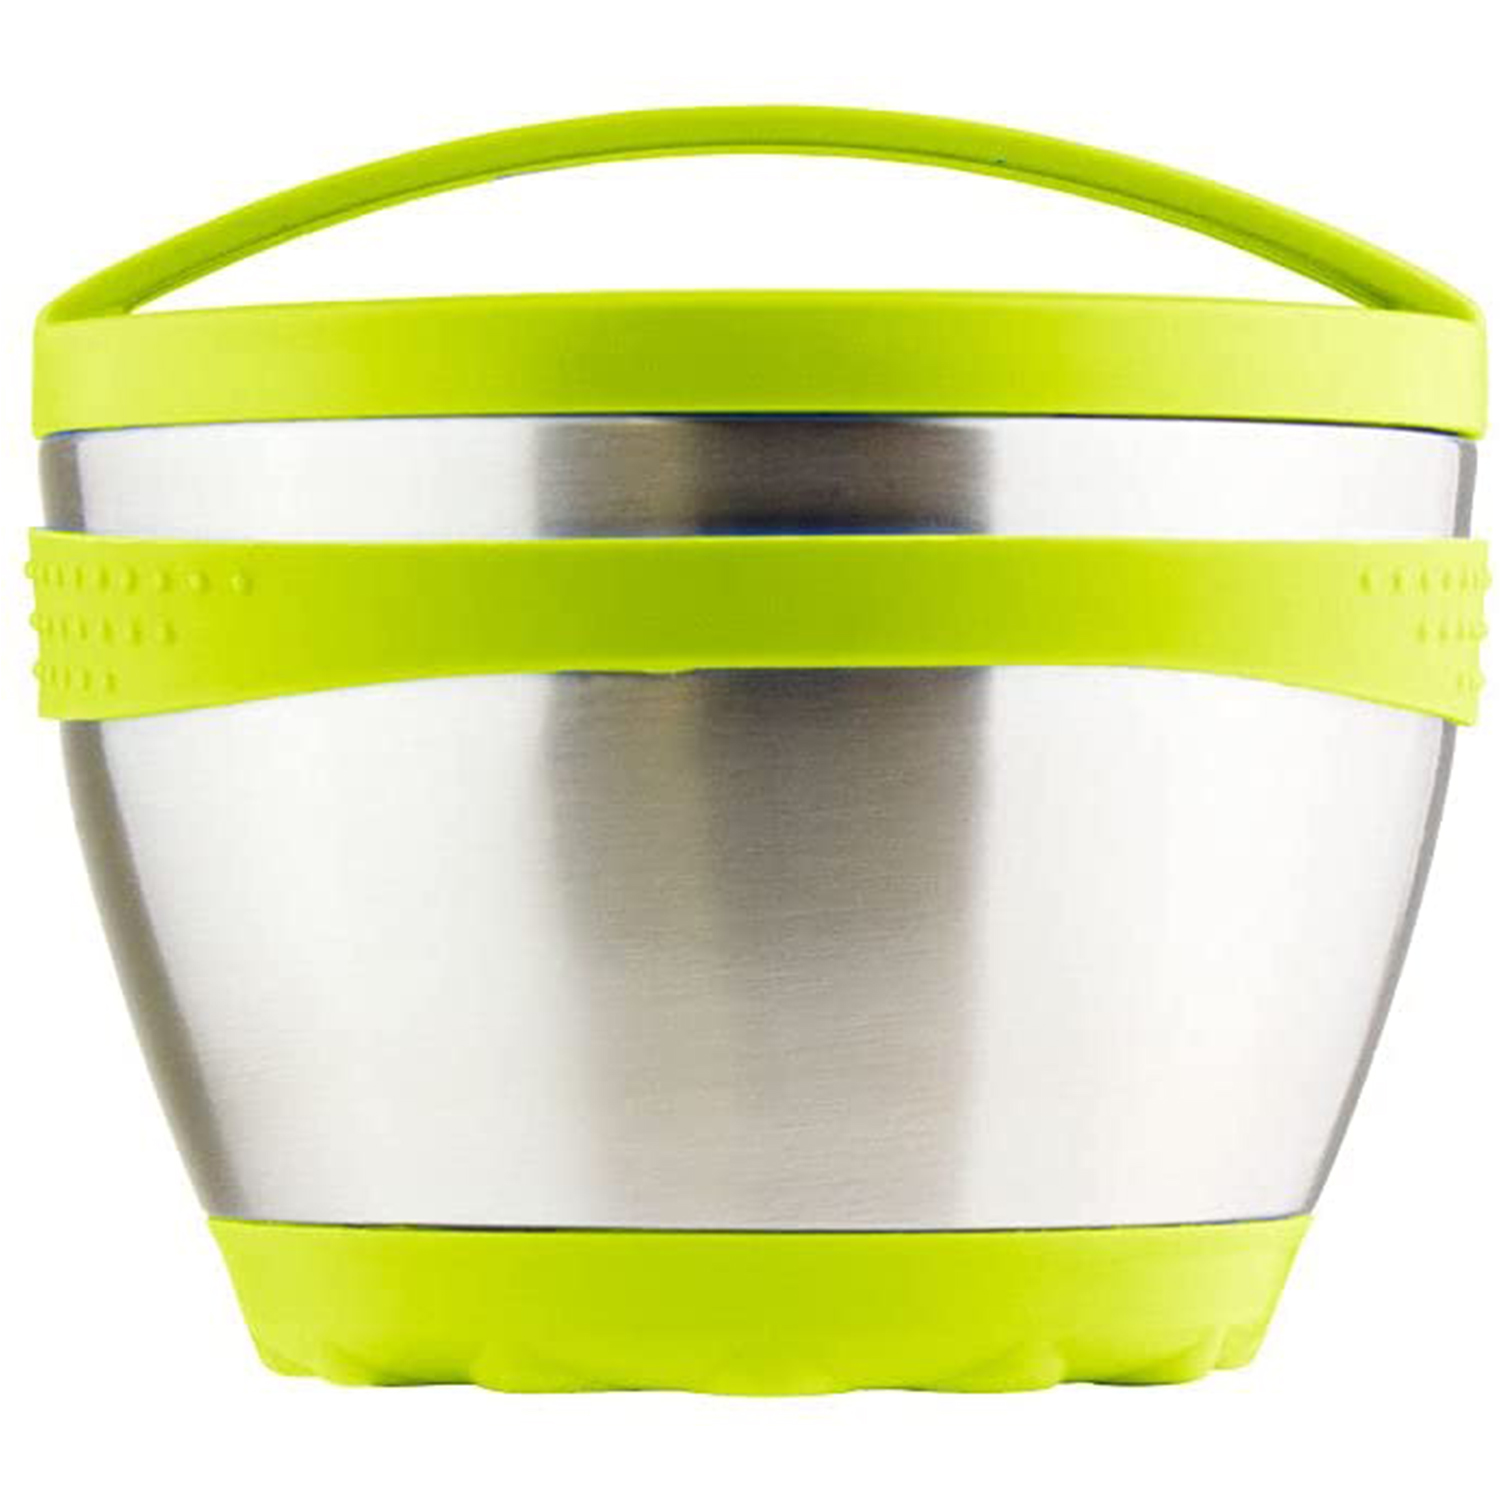  Insulated Baby Bowl, Detachable Kids Feeding Bowl, Dishwasher  Safe, Sizzling Stainless Steel Interior with Suction Base for Kids for  Travel (Green) : Baby